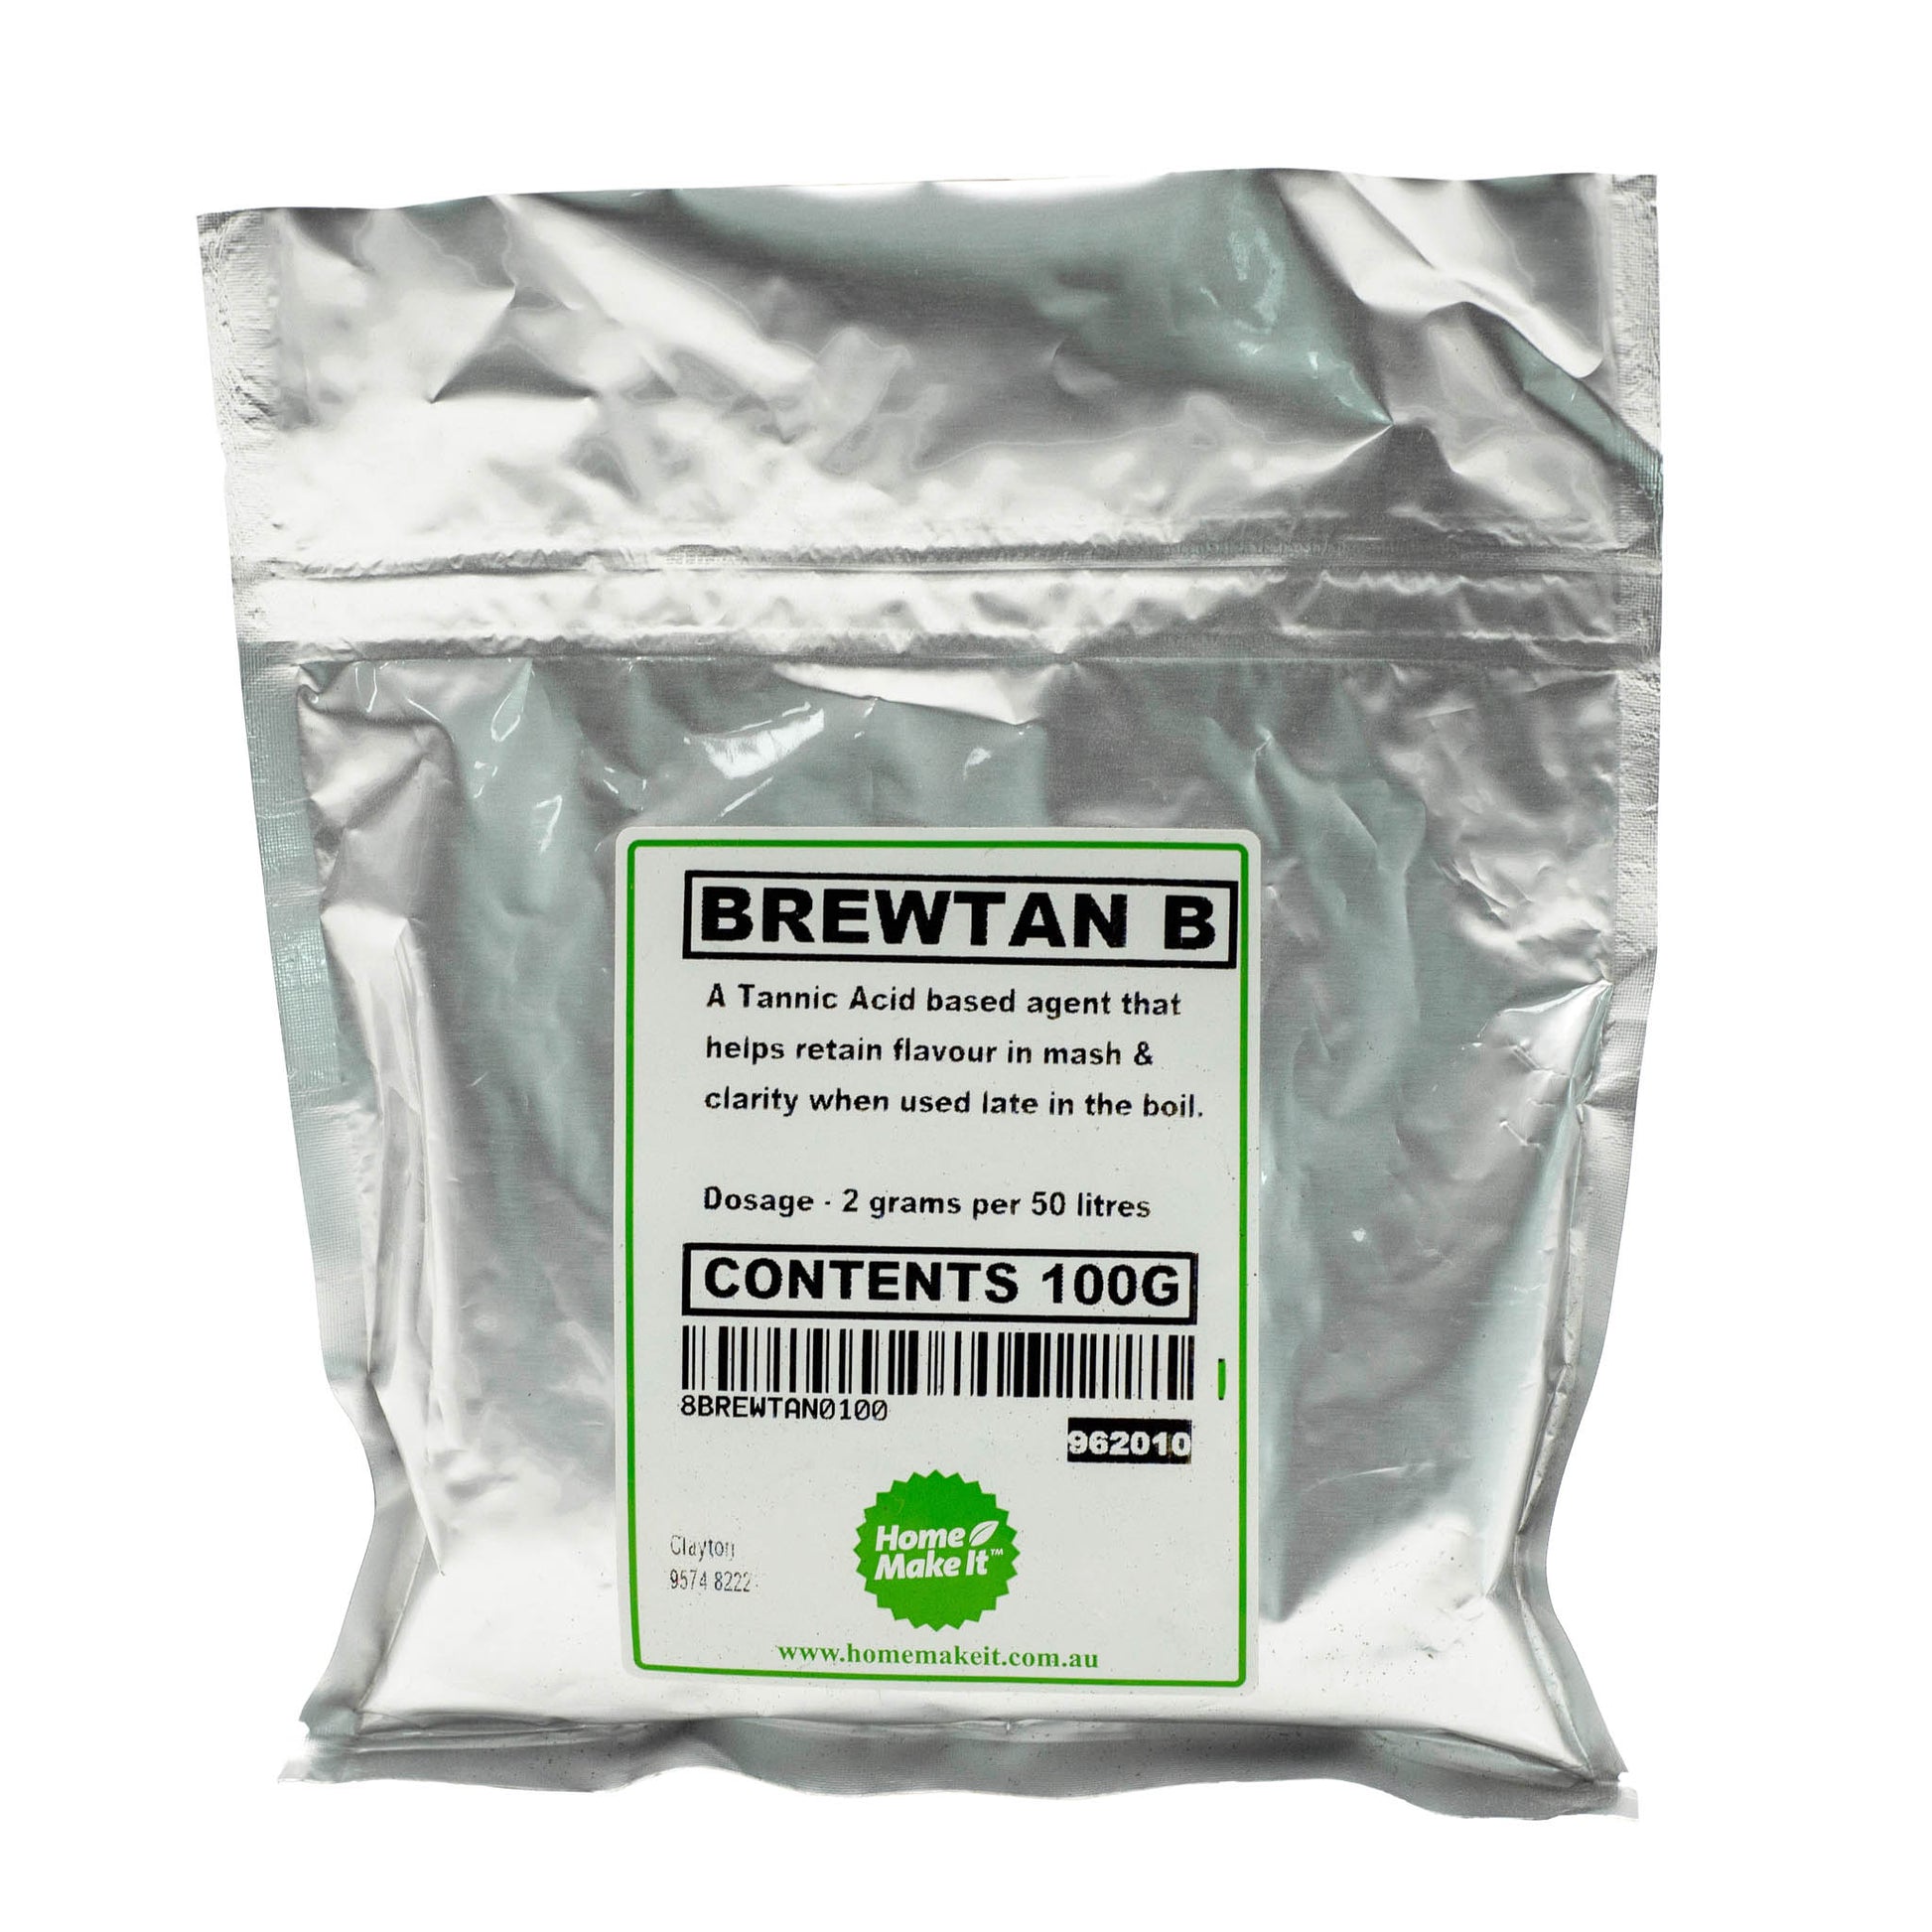 100g packet of Brewtan B. a Tannic acid based agent that helps retain flavour and clarity.